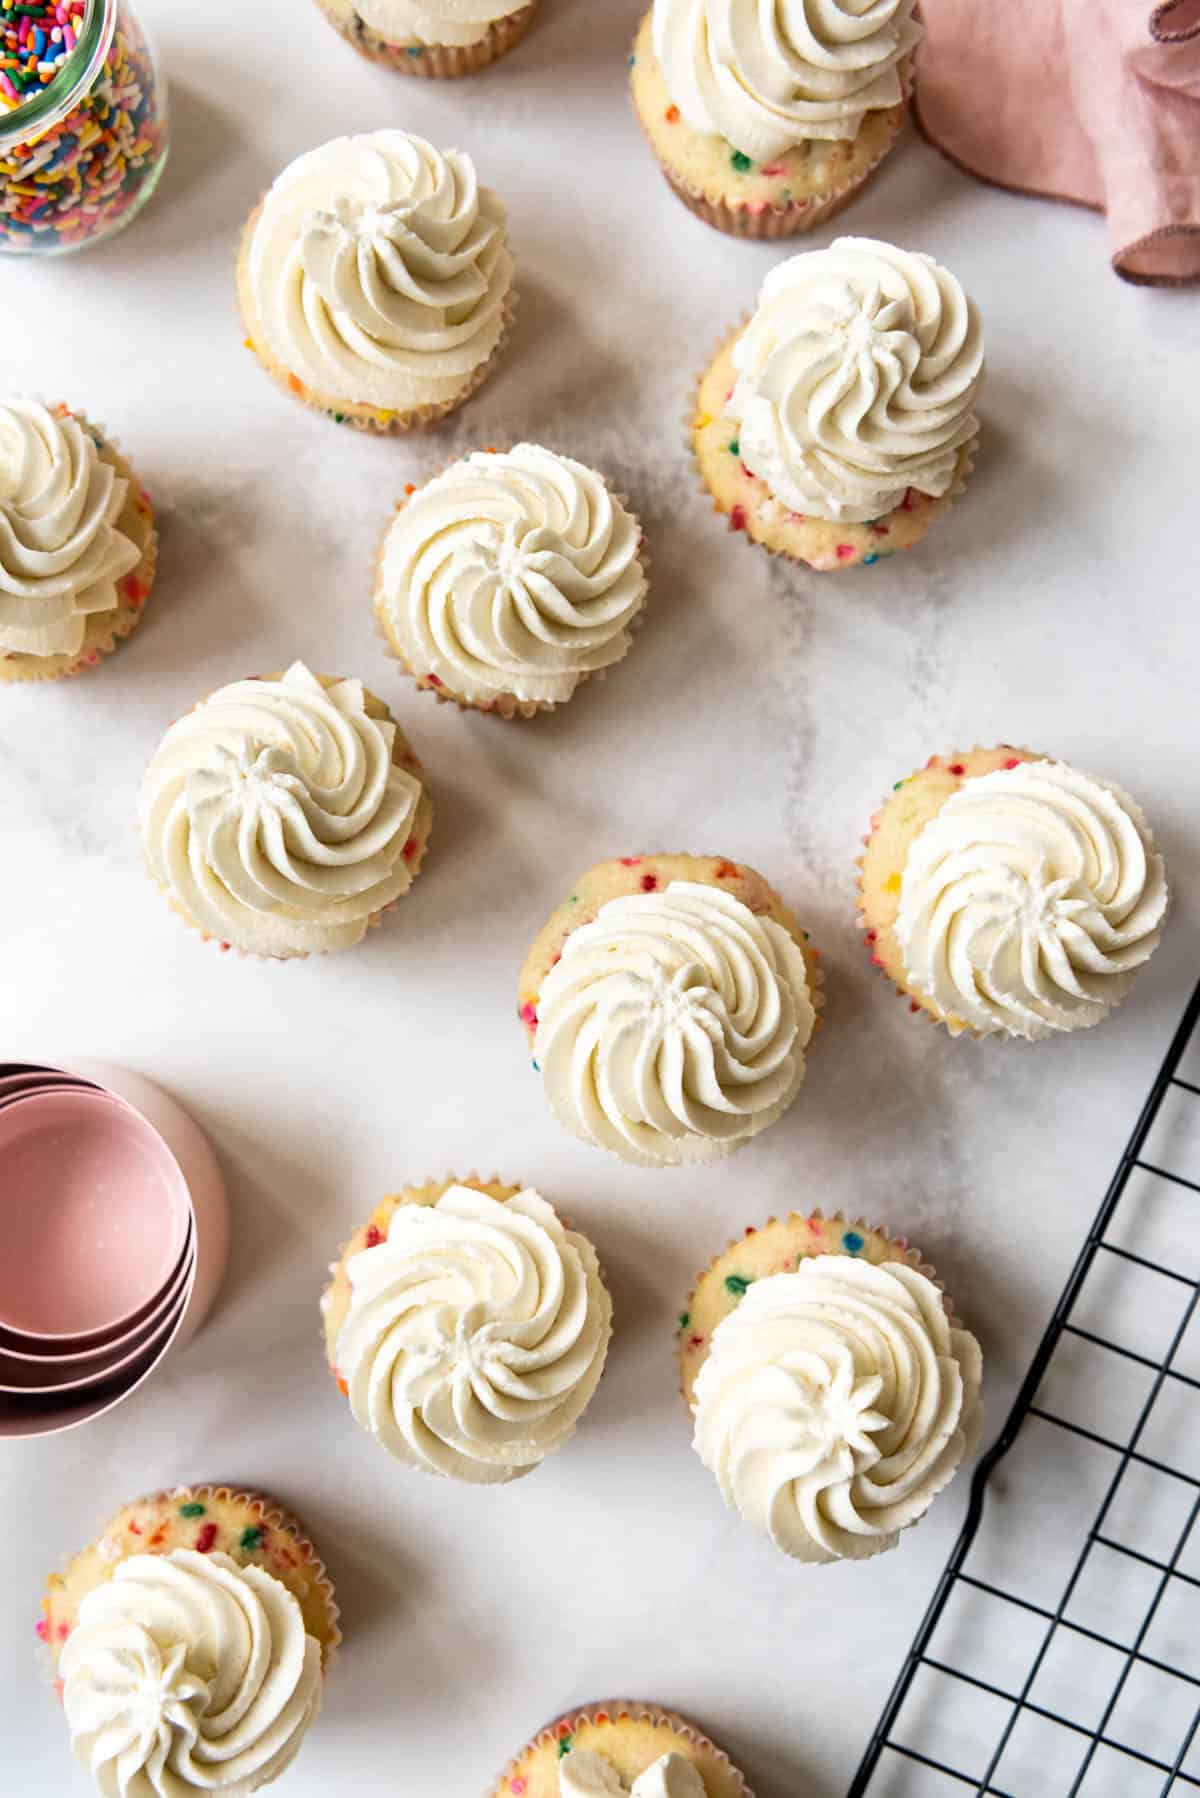 An overhead image of cupcakes decorated with swirls of white Swiss meringue buttercream frosting.